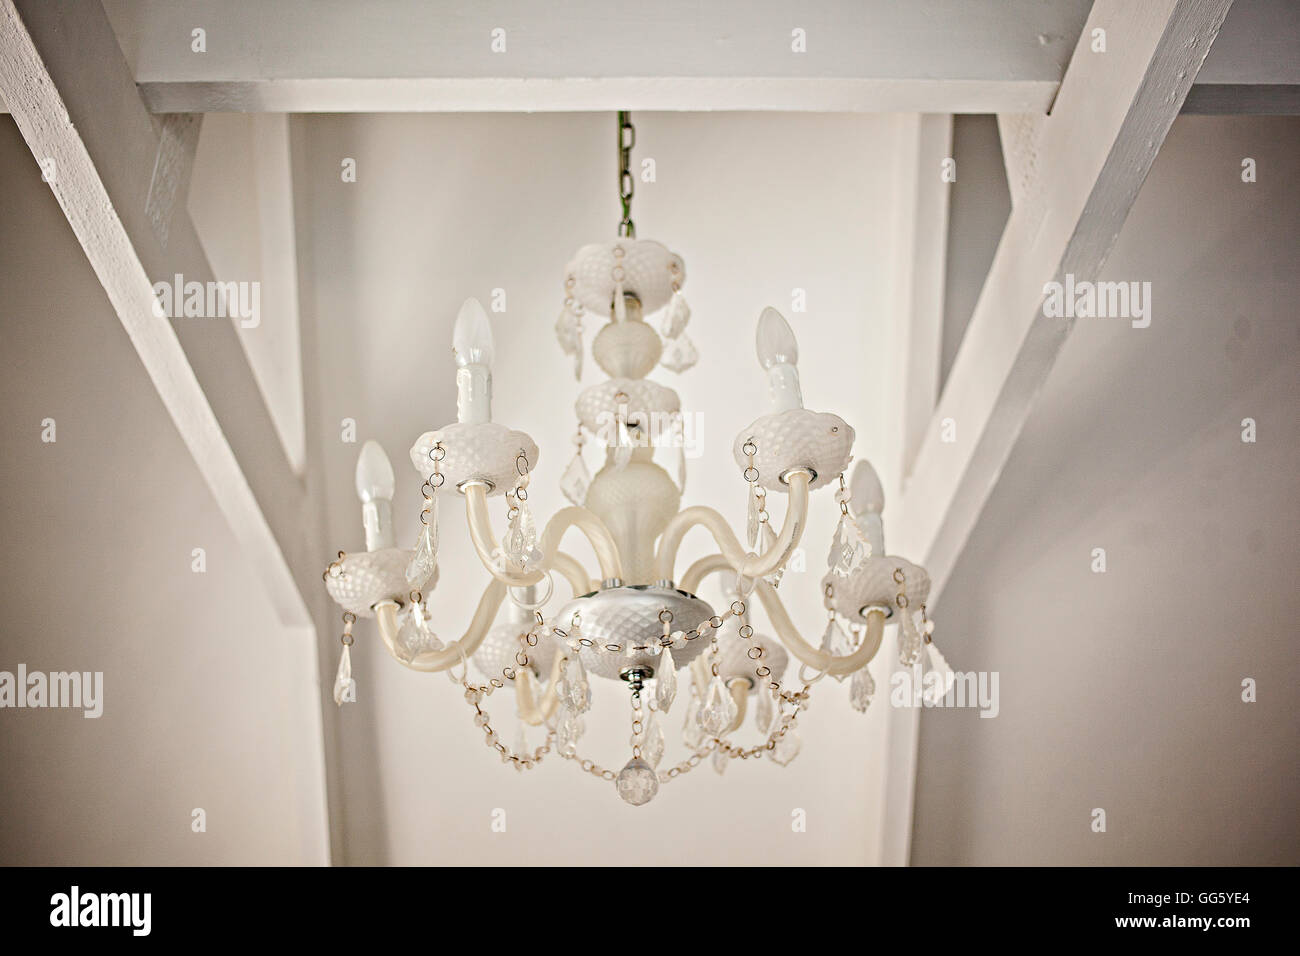 Low angle view of chandelier hanging from ceiling Stock Photo